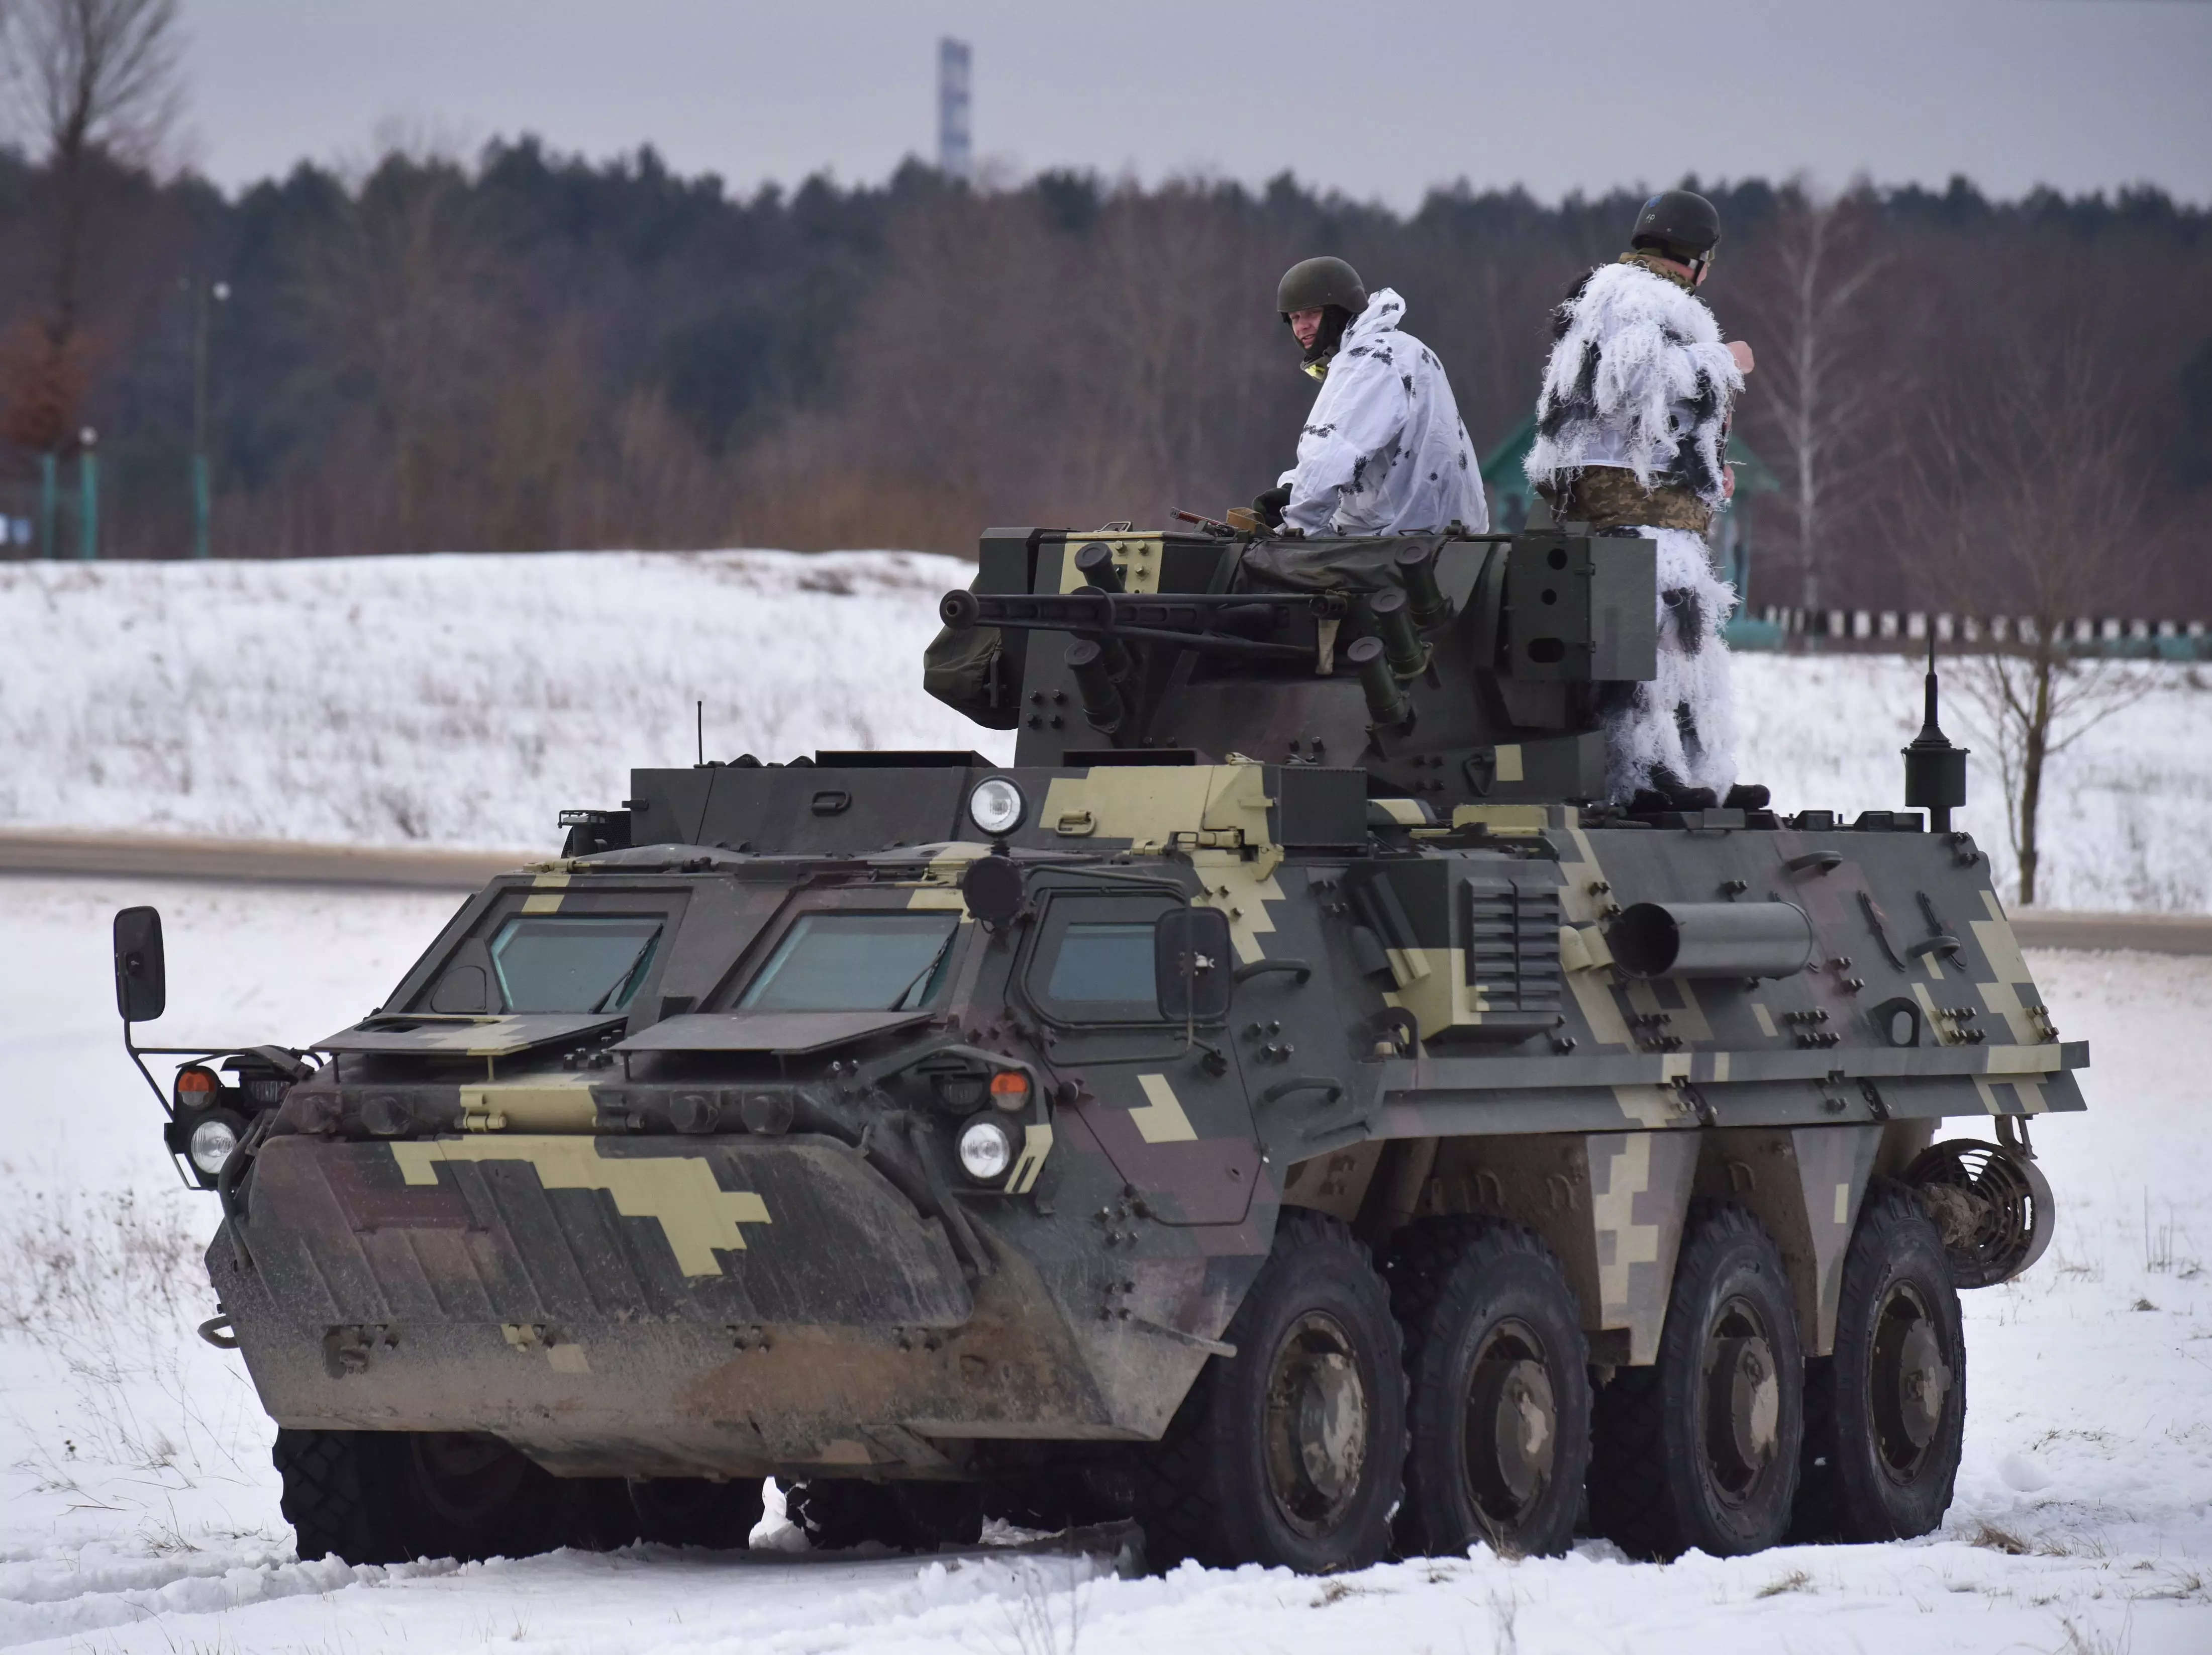 LVIV, UKRAINE - 2022/02/04: Ukrainian soldiers ride on top of the BTR-4 "Bucephalus" during the weapons training exercise at the training ground at the International Center for Peacekeeping and Security